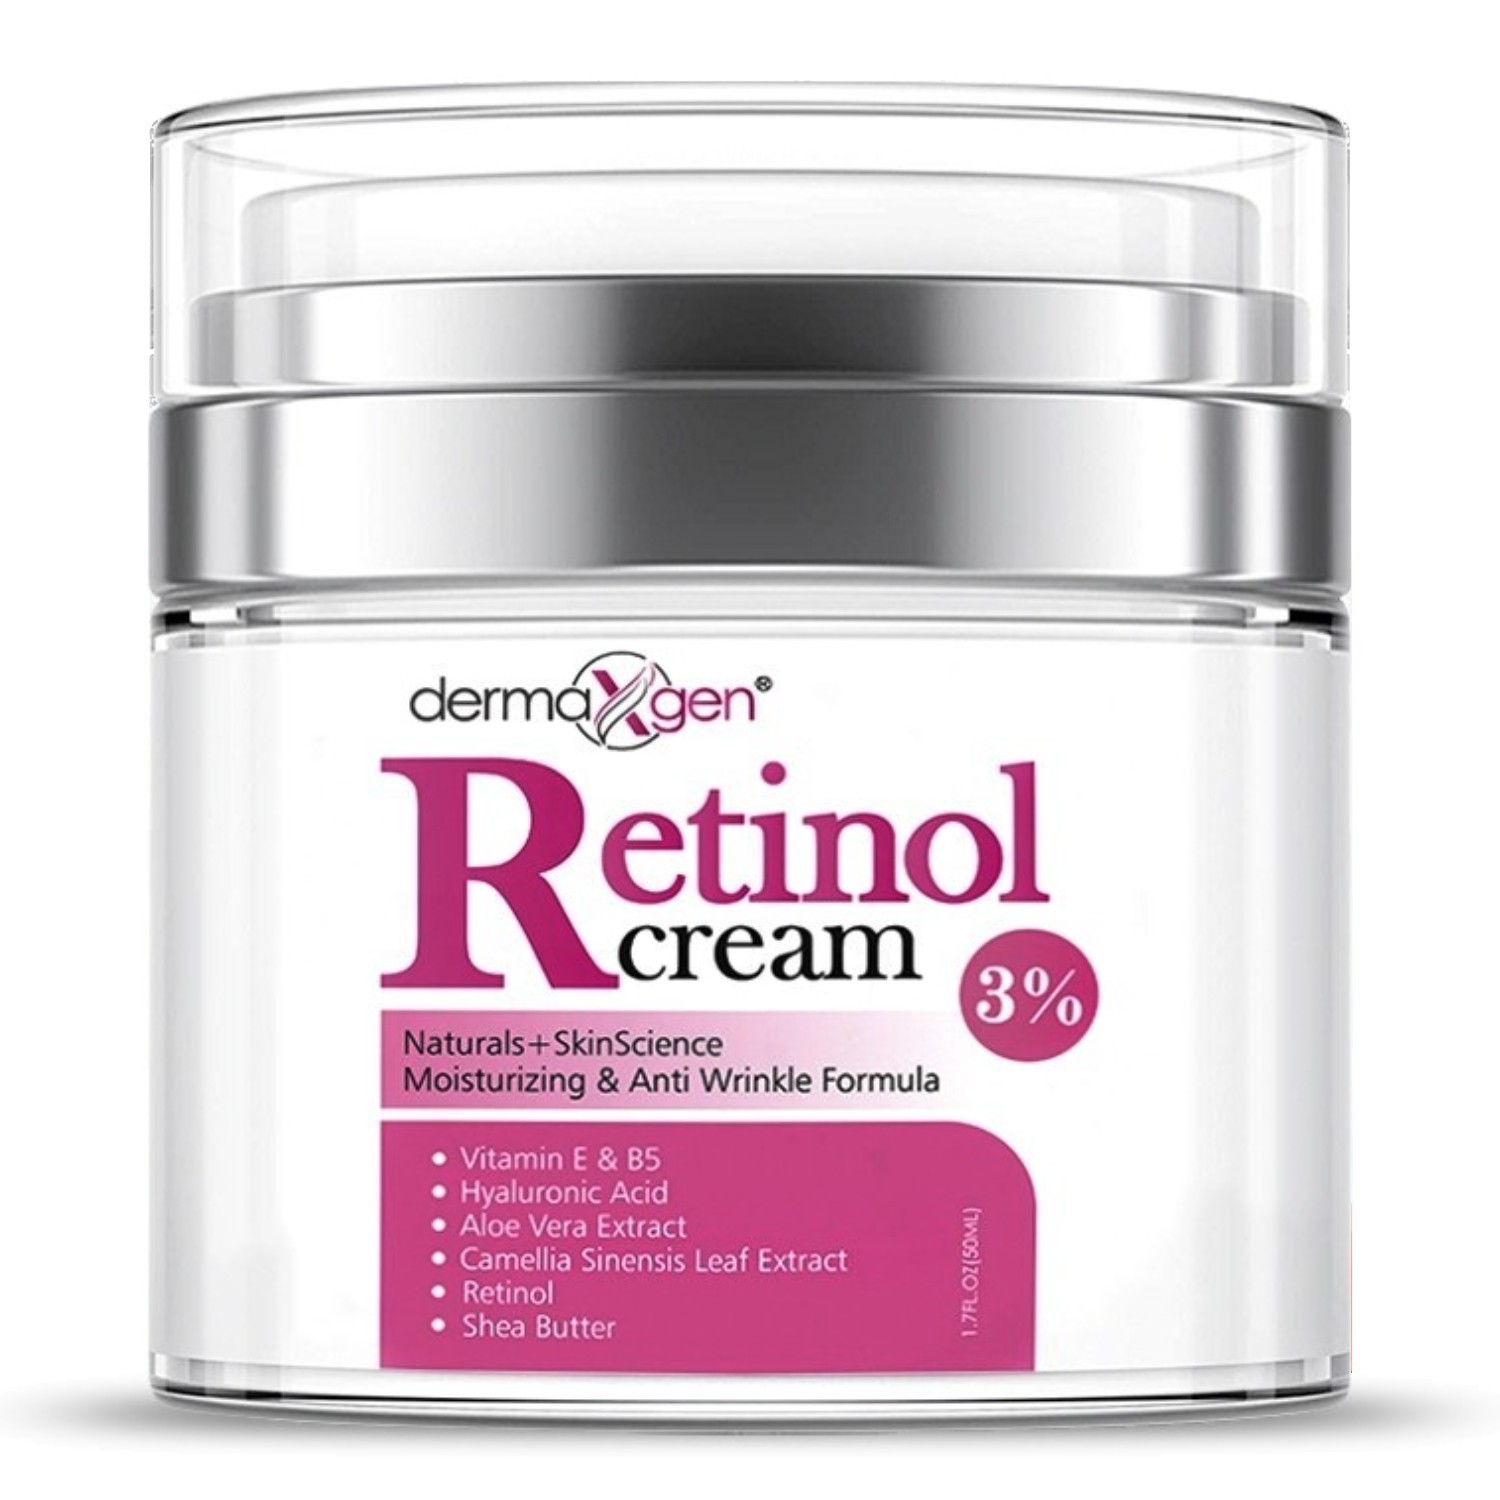 Retinol Moisturizer Cream High Strength for Face and Eye Area Miracle Plus - Retinol, Hyaluronic Acid, Vitamin E, Green Tea - Anti aging Formula Reduces Wrinkles, Fine Lines, Spots-Day and Night - image 1 of 9